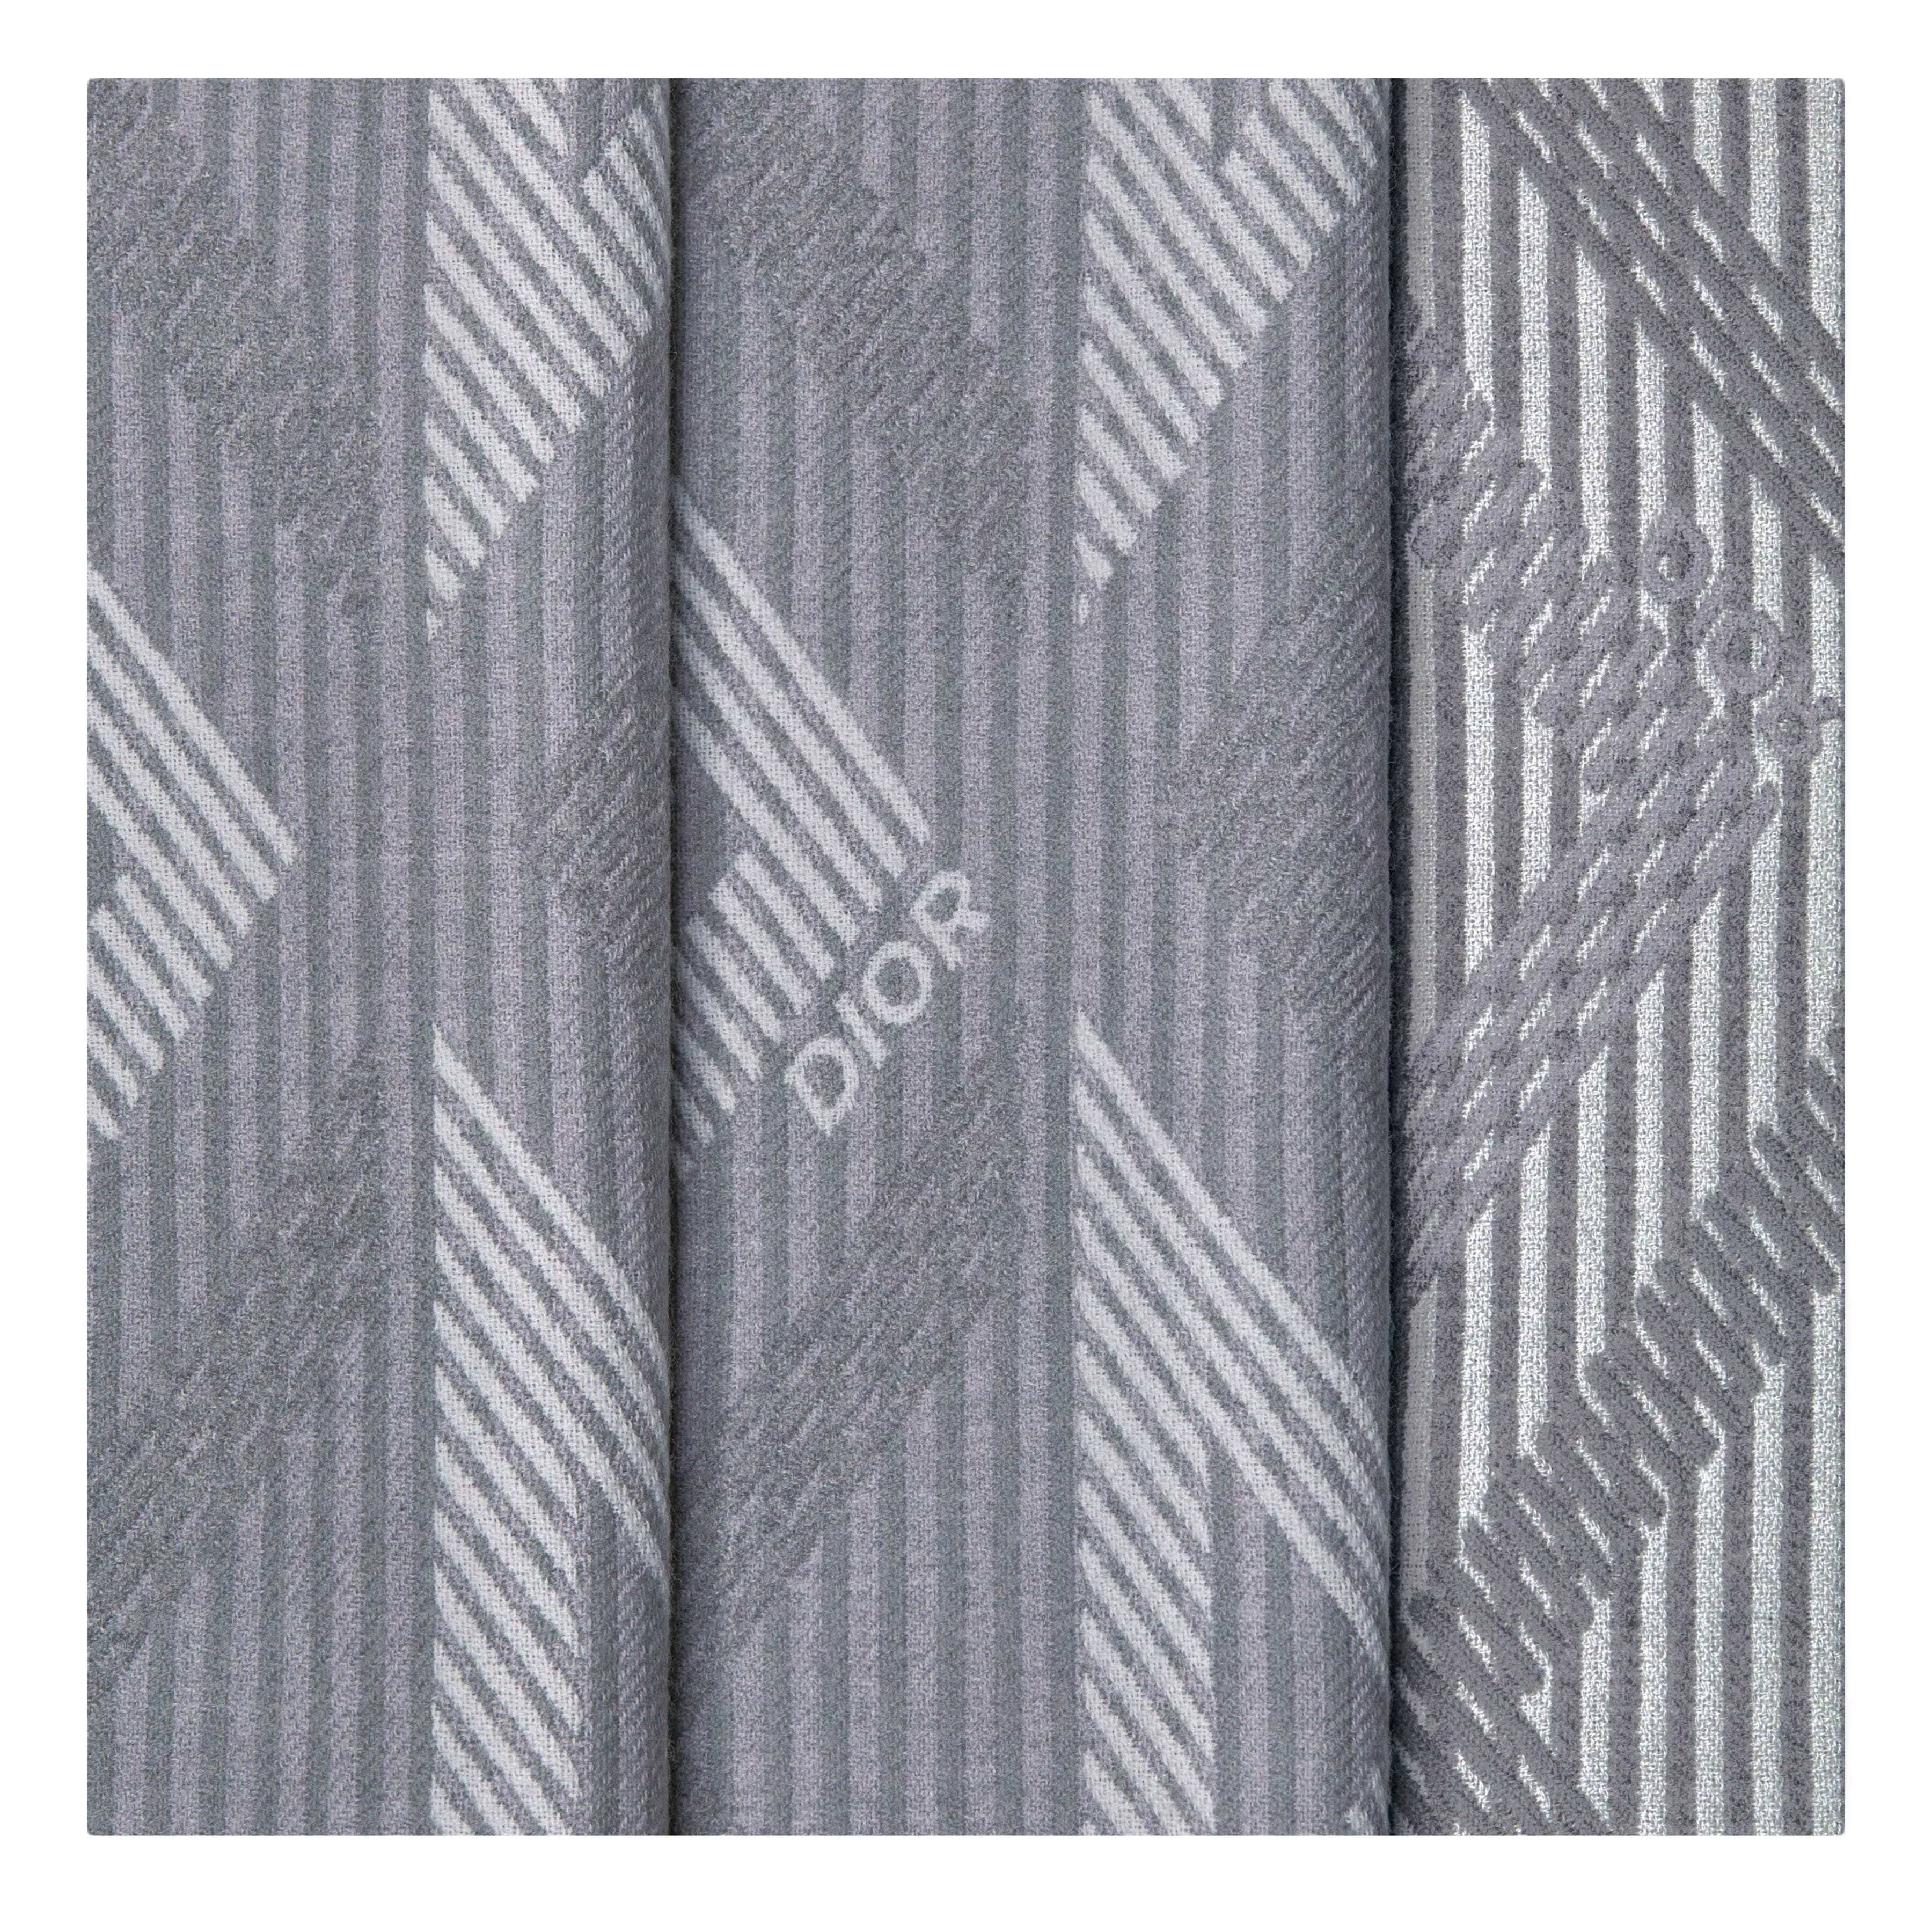 Grey Stripe/Triangle Patterened Fringed Scarf Accessories Christian Dior